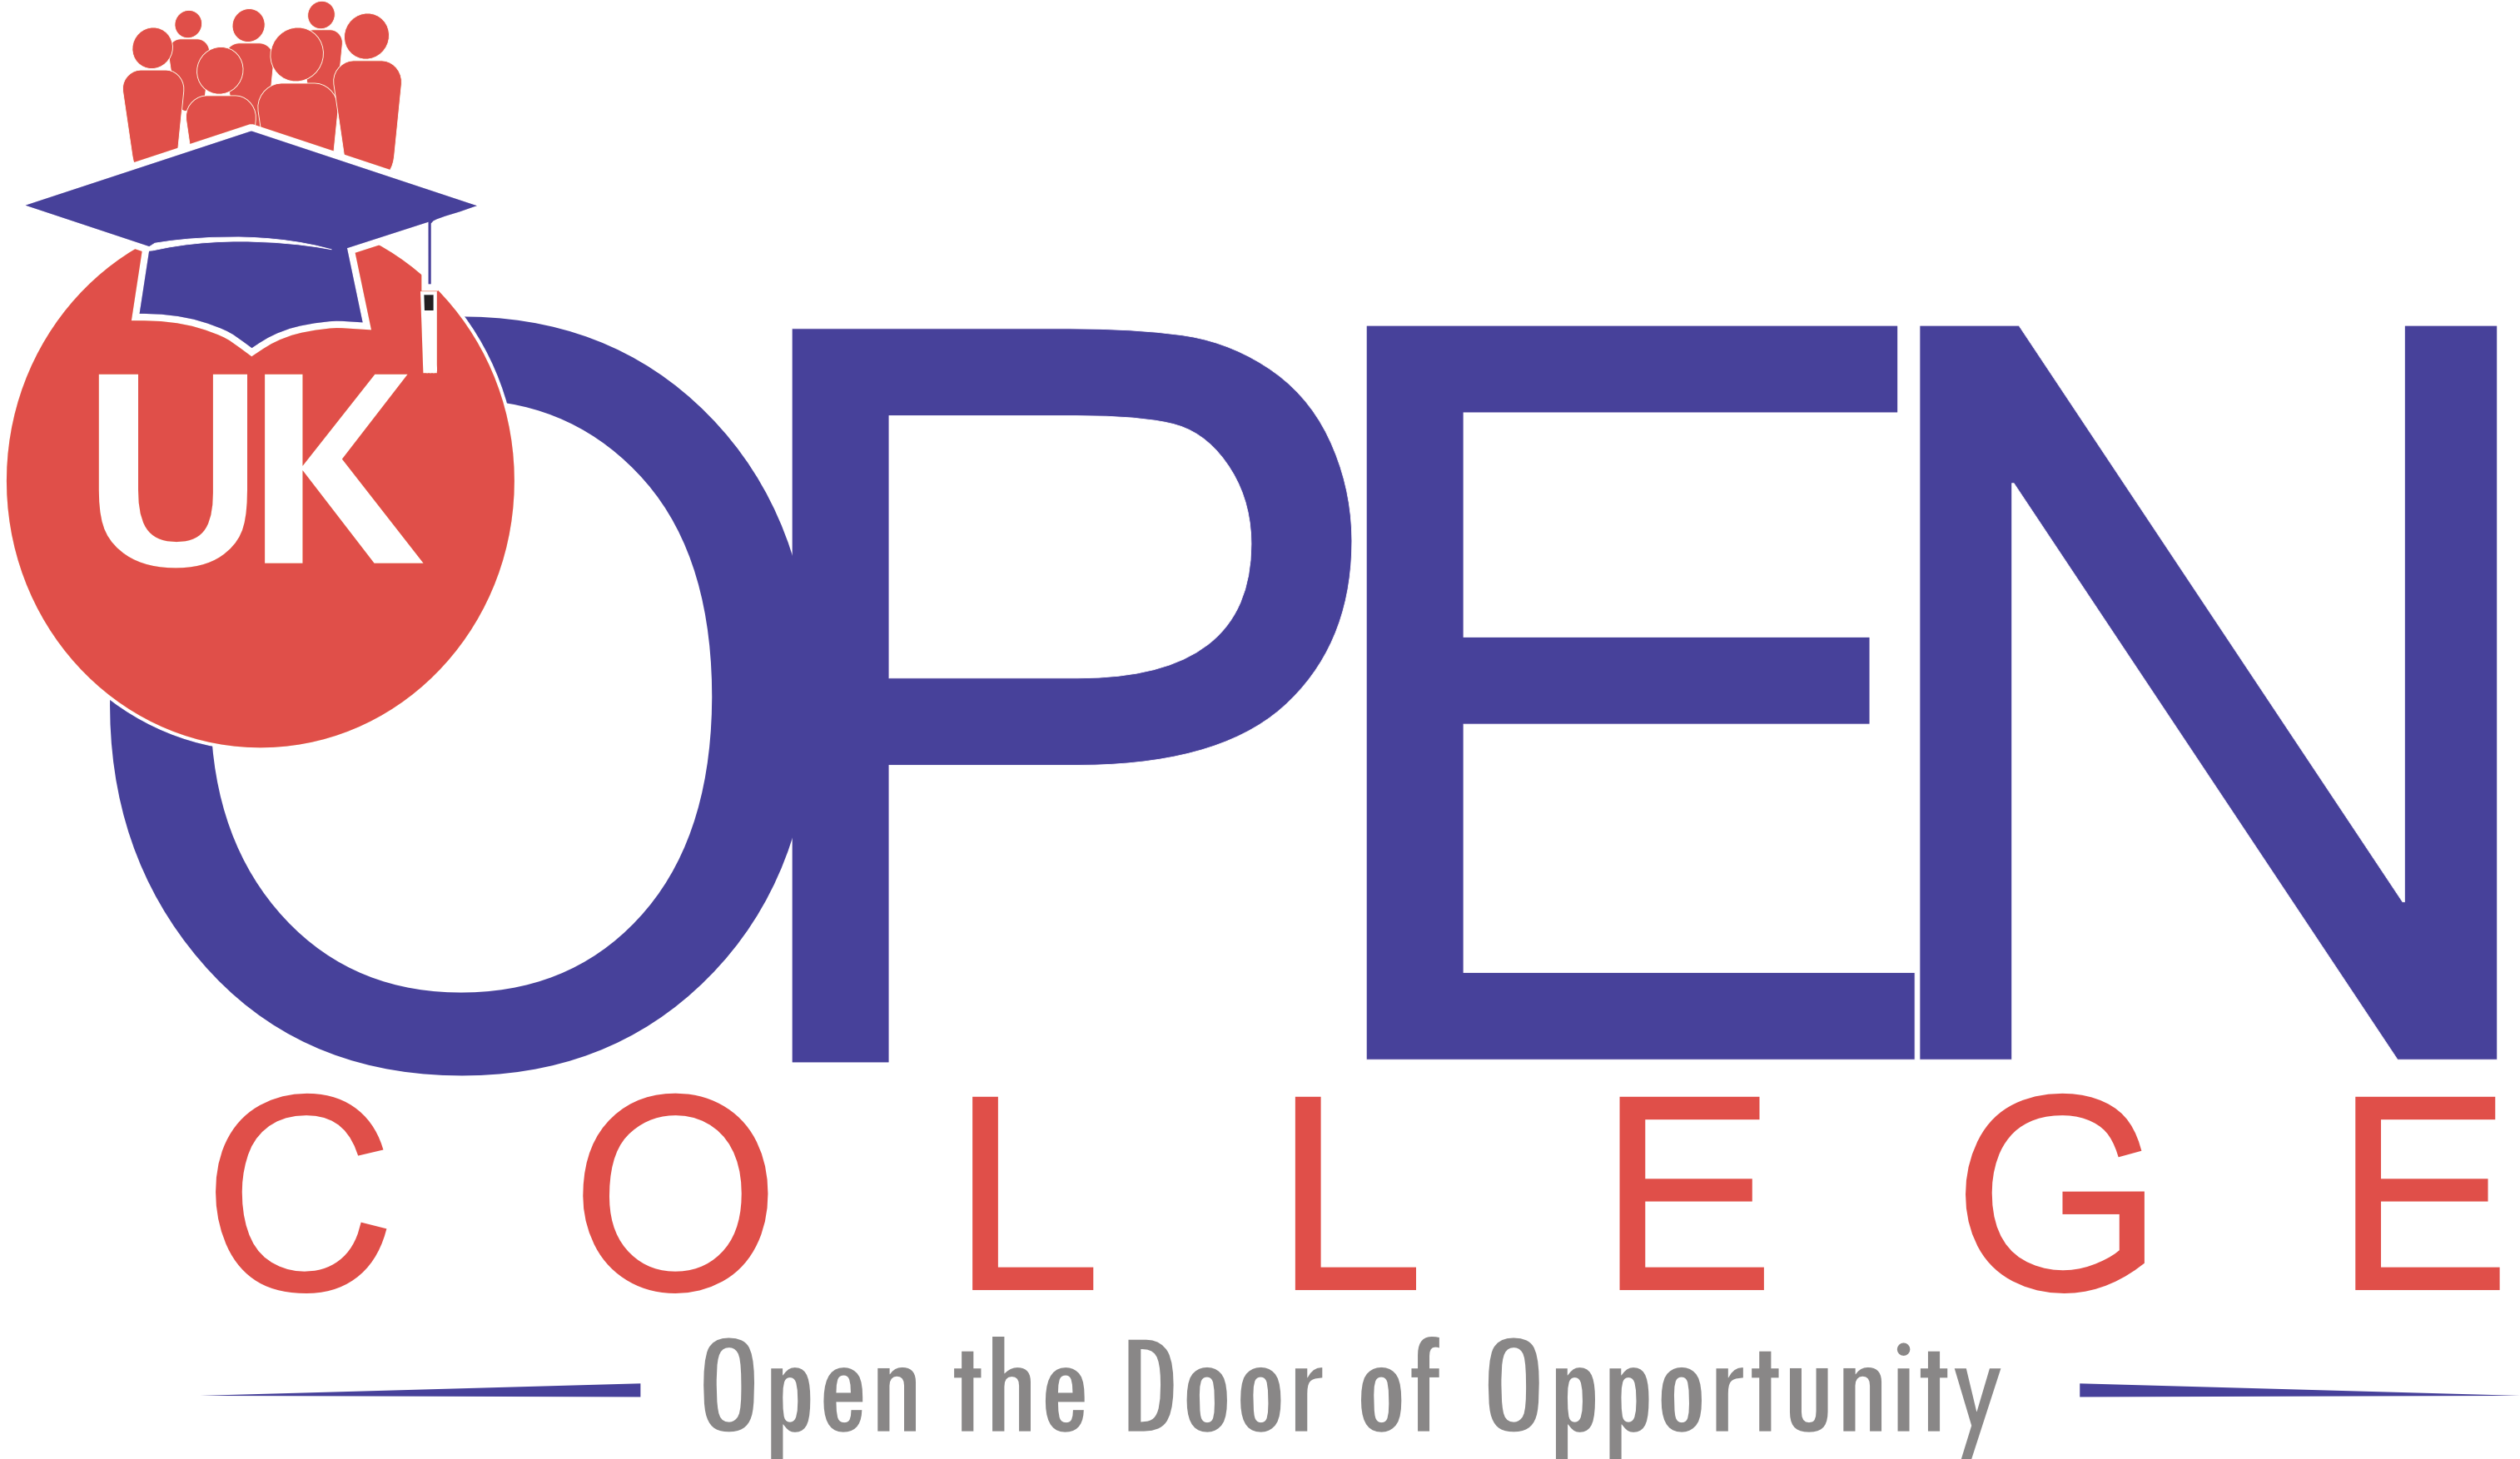 Online Courses | Distance Learning Courses | UK Open College